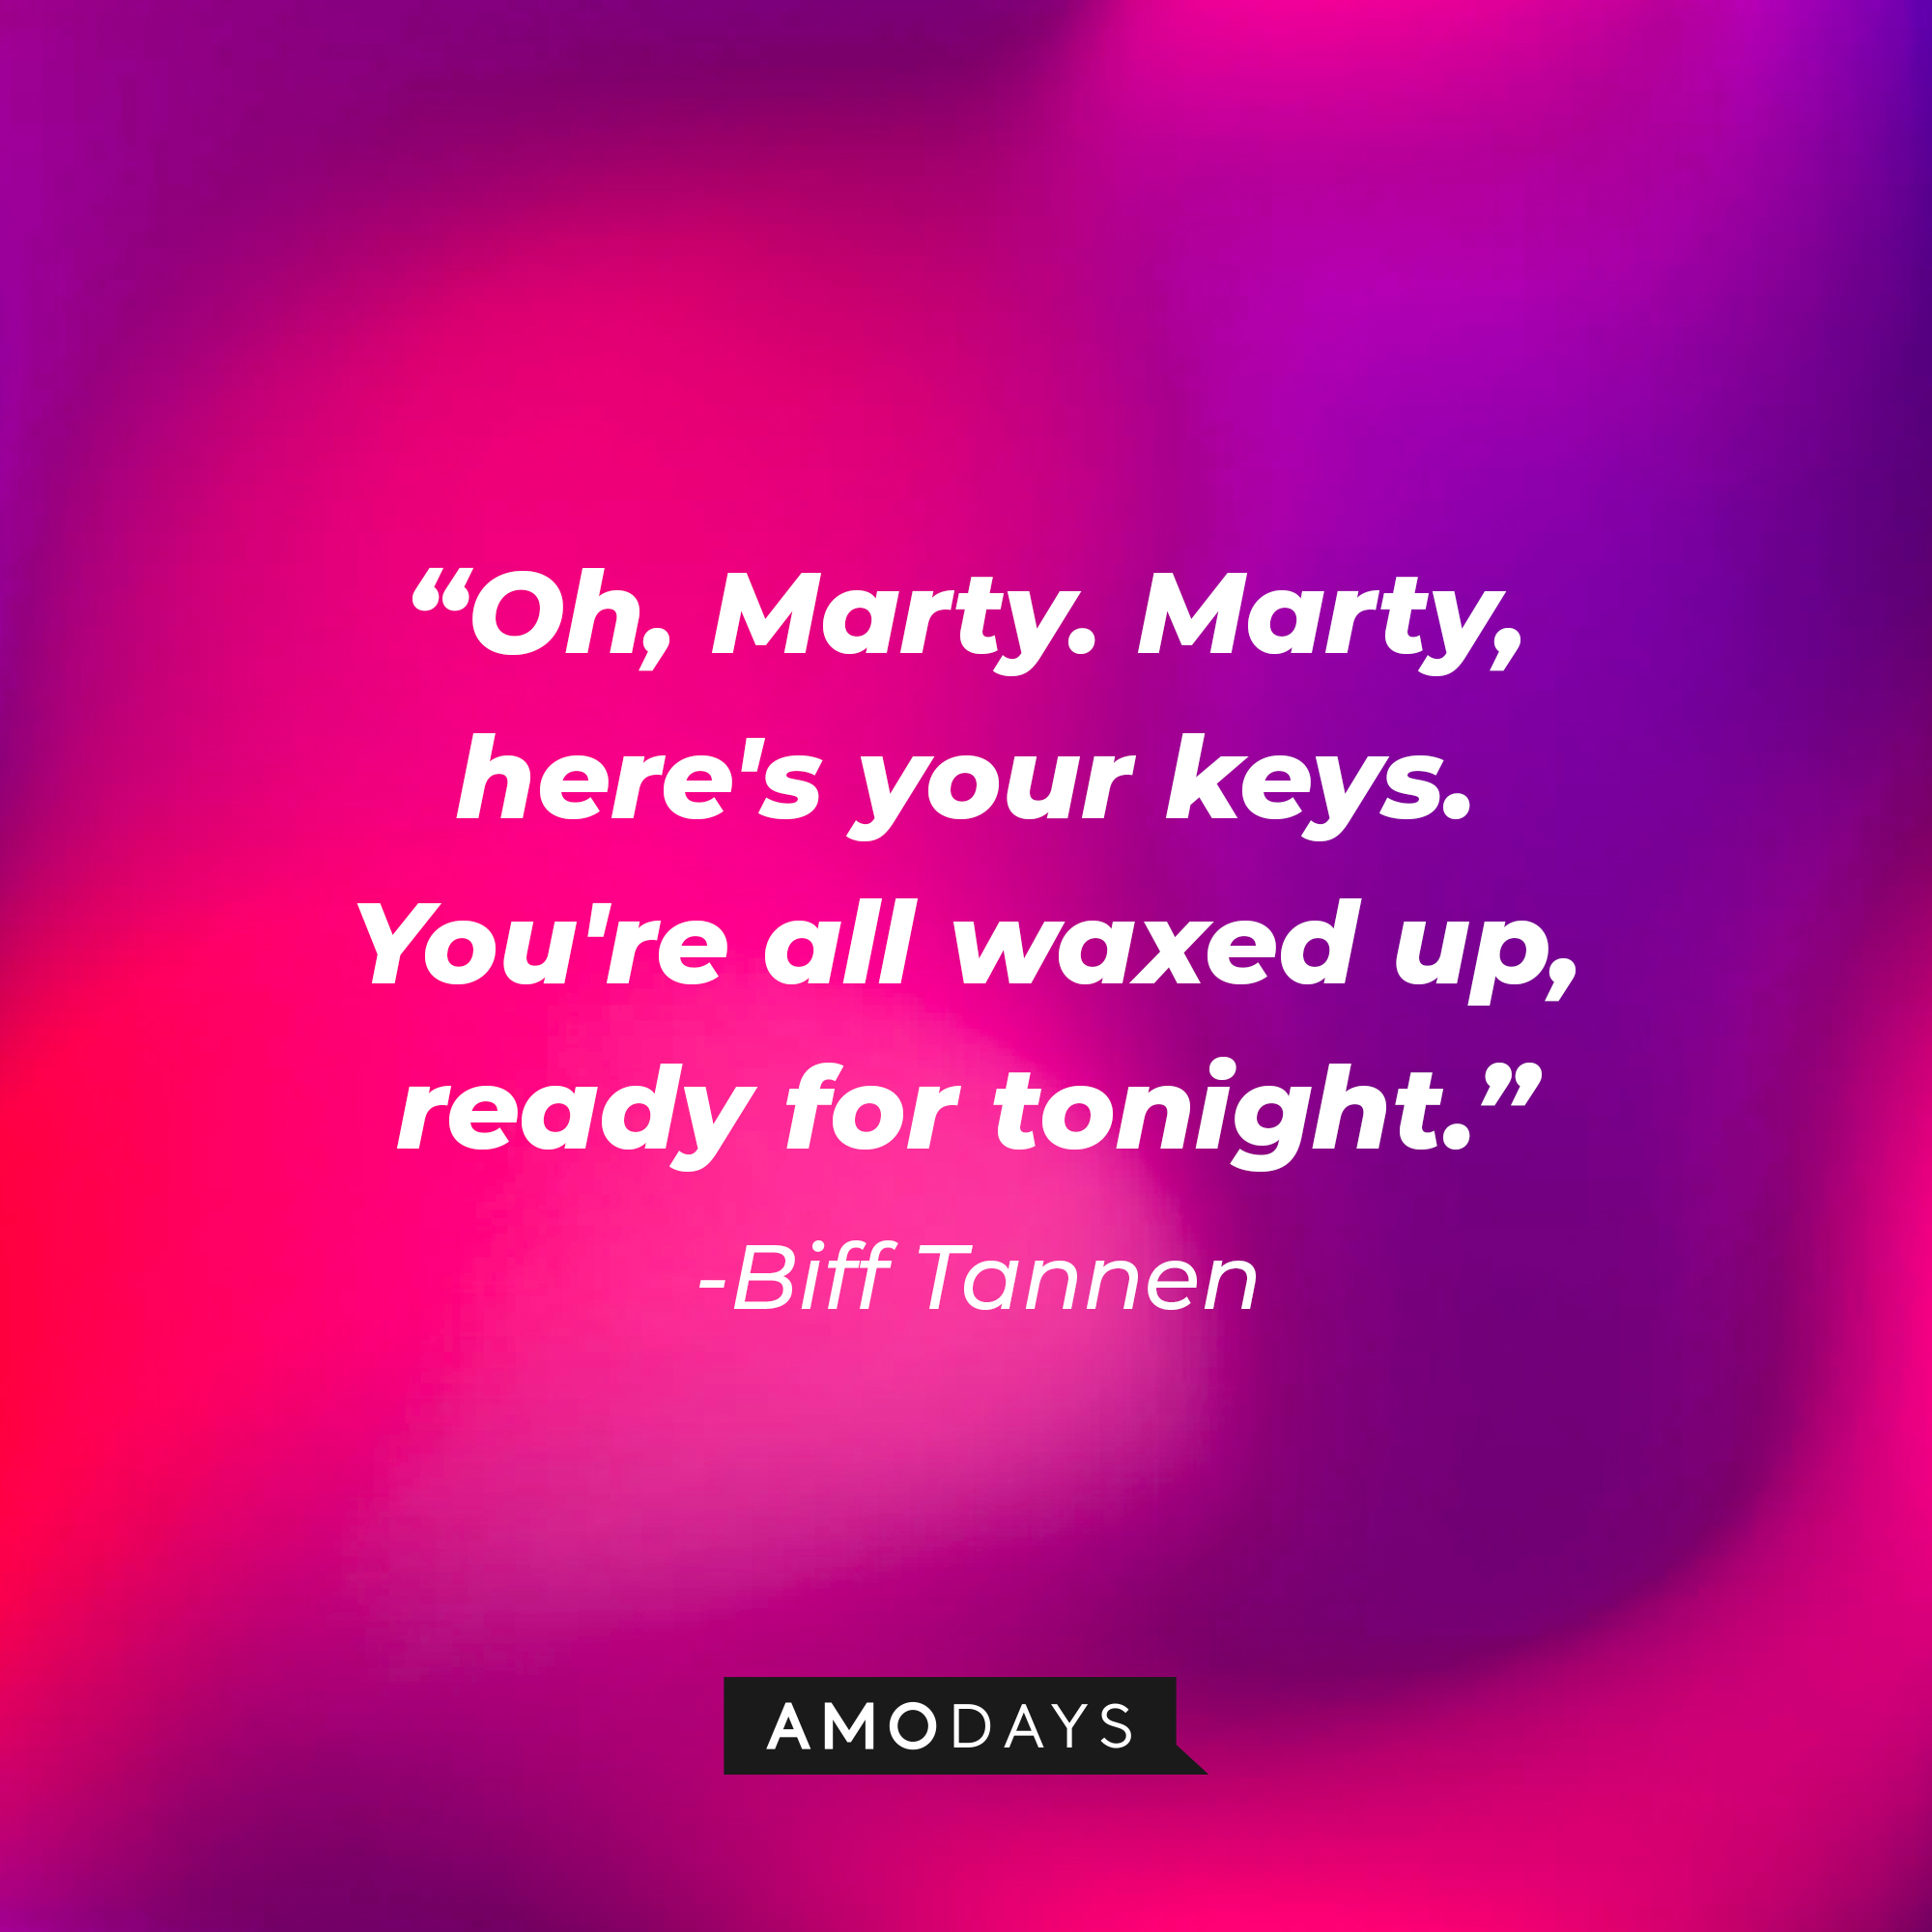 Biff Tannen’s quote: “Oh, Marty. Marty, here's your keys. You're all waxed up, ready for tonight.” | Source: AmoDays